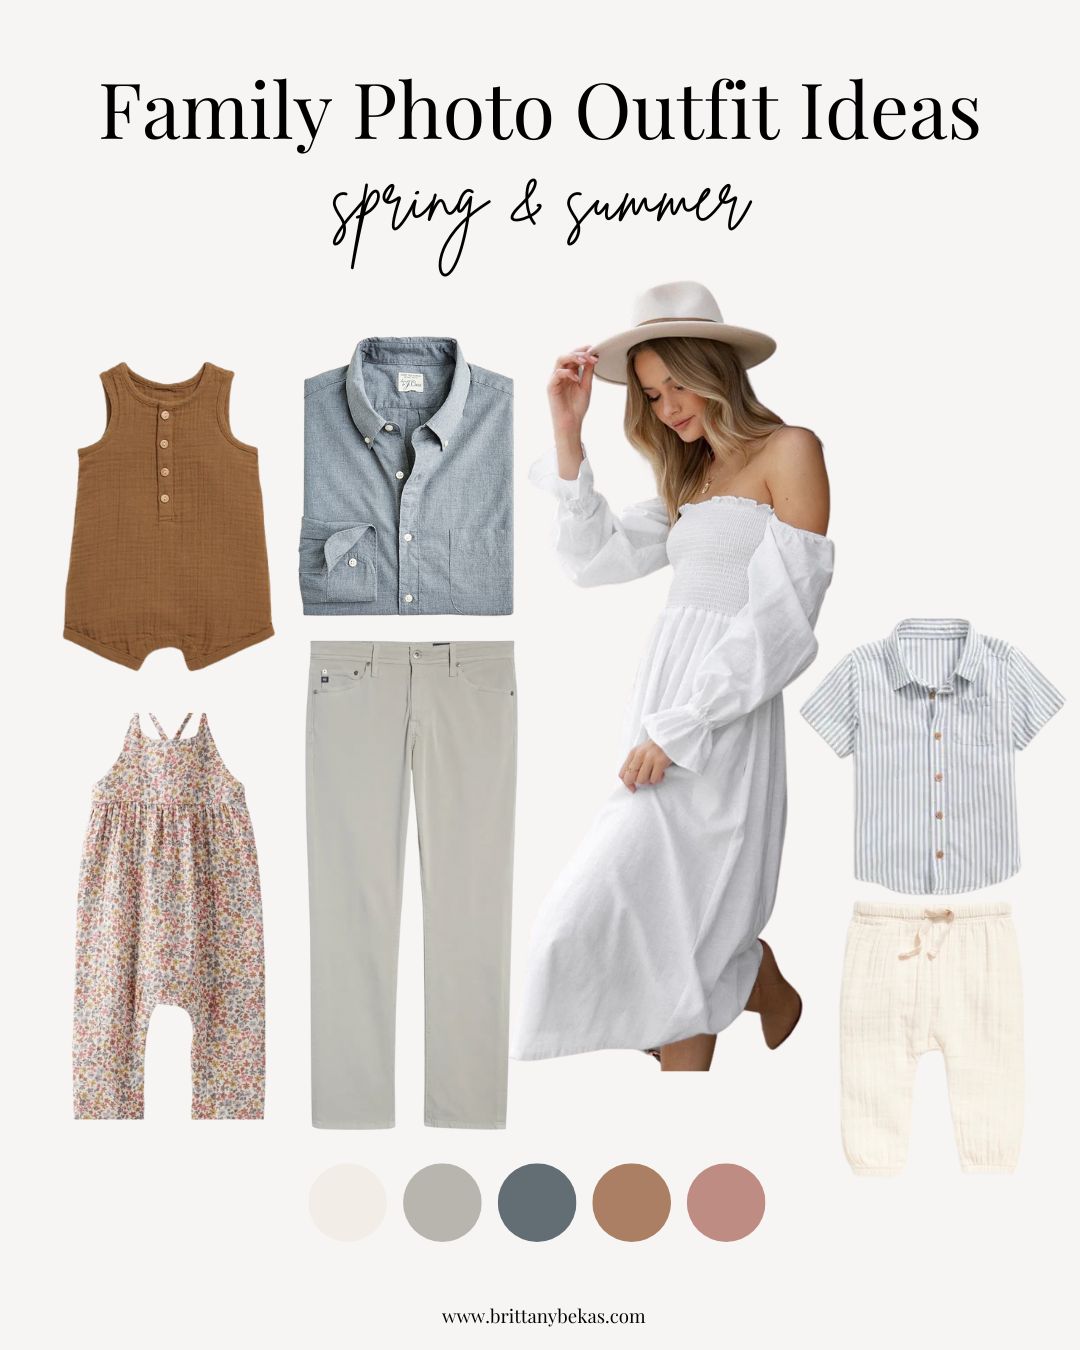 Family Photo Outfits | What to wear family photos